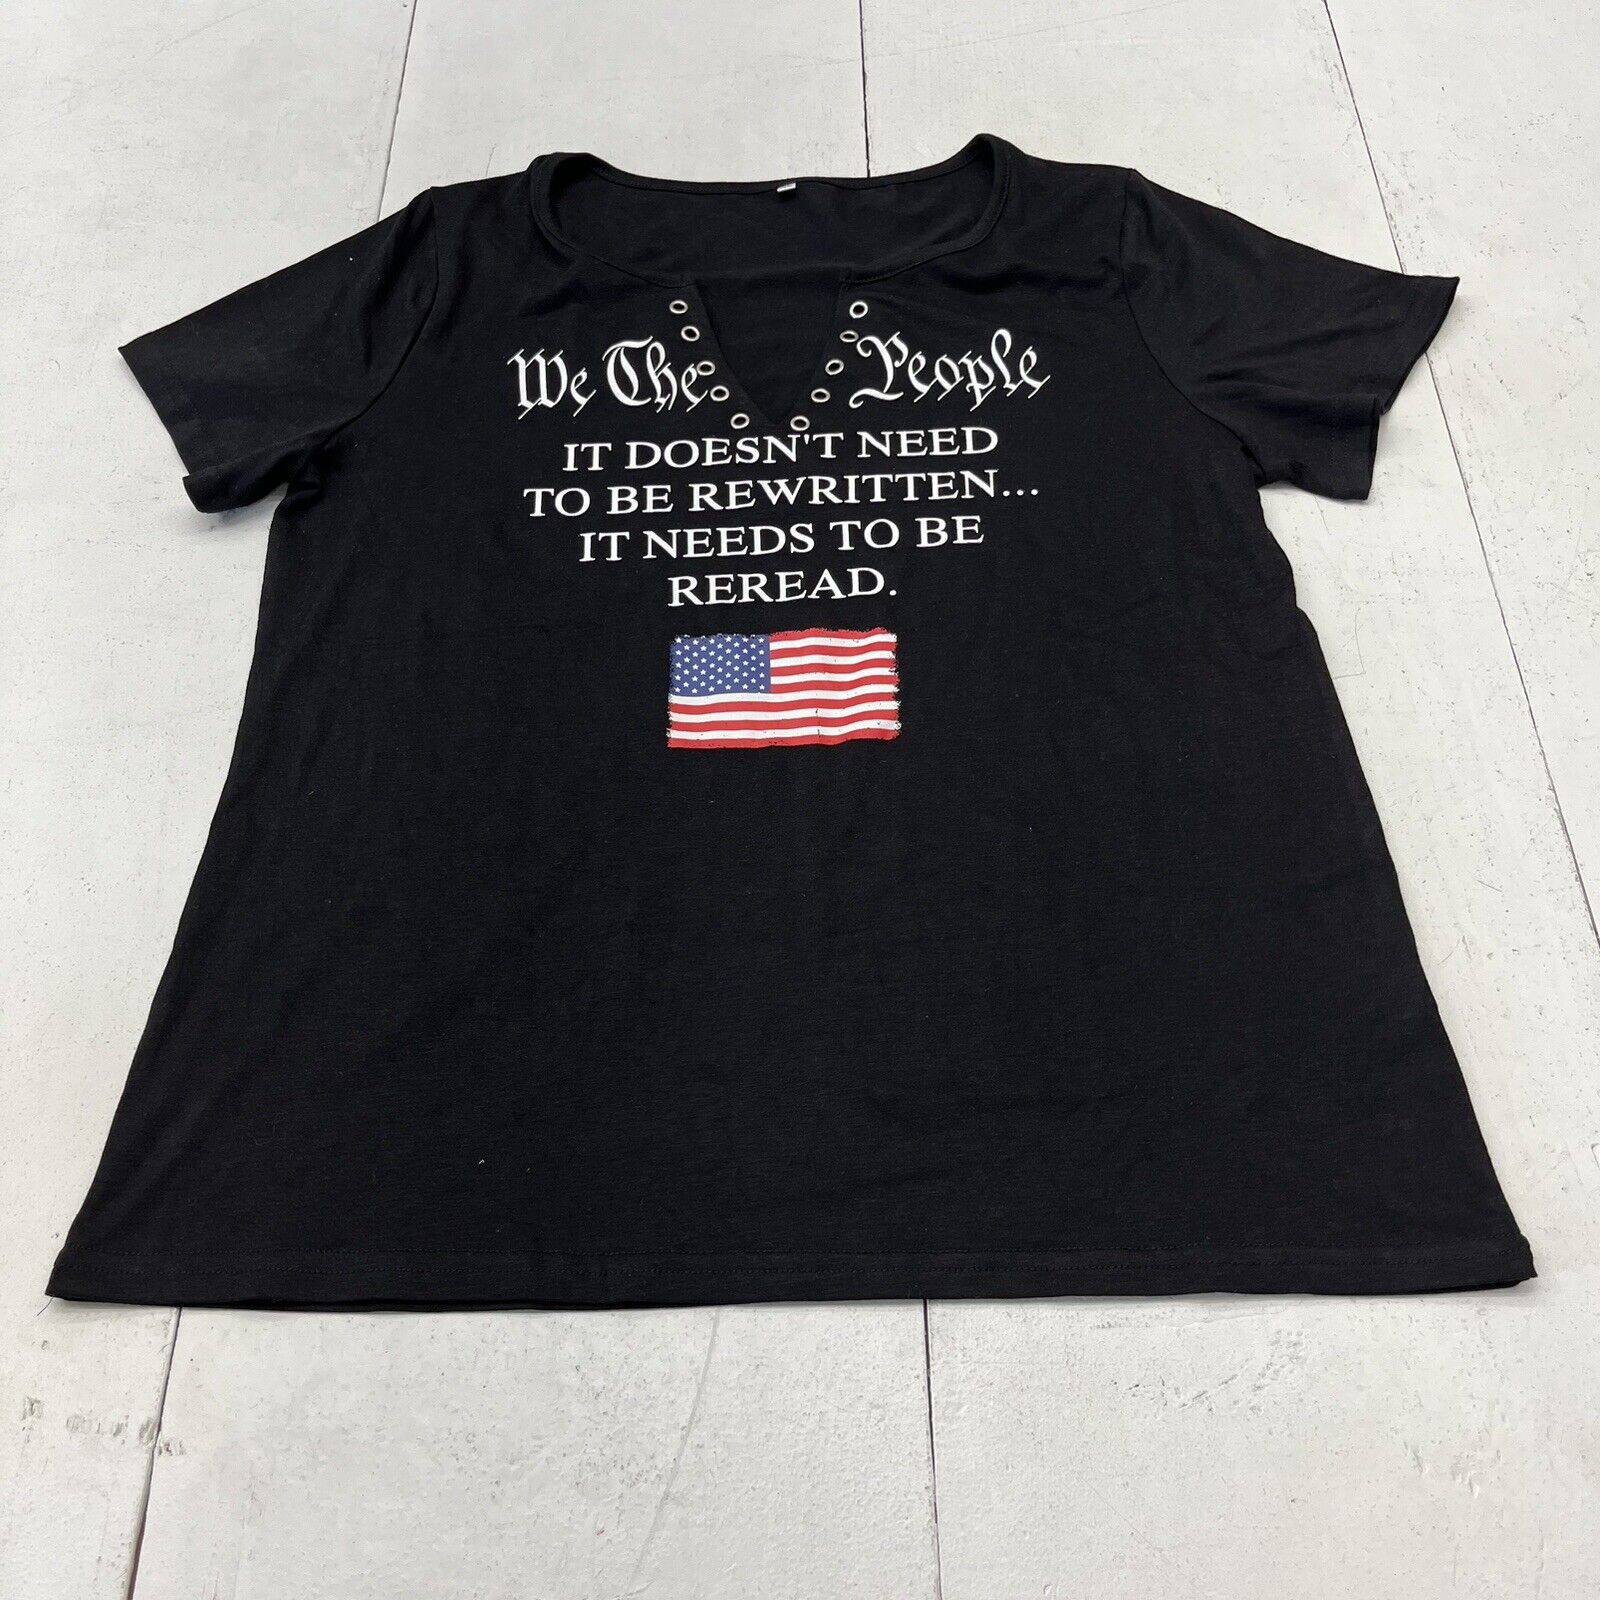 Shein Black “We The People” Short Sleeve V-Neck T-Shirt Women’s Size XL NEW